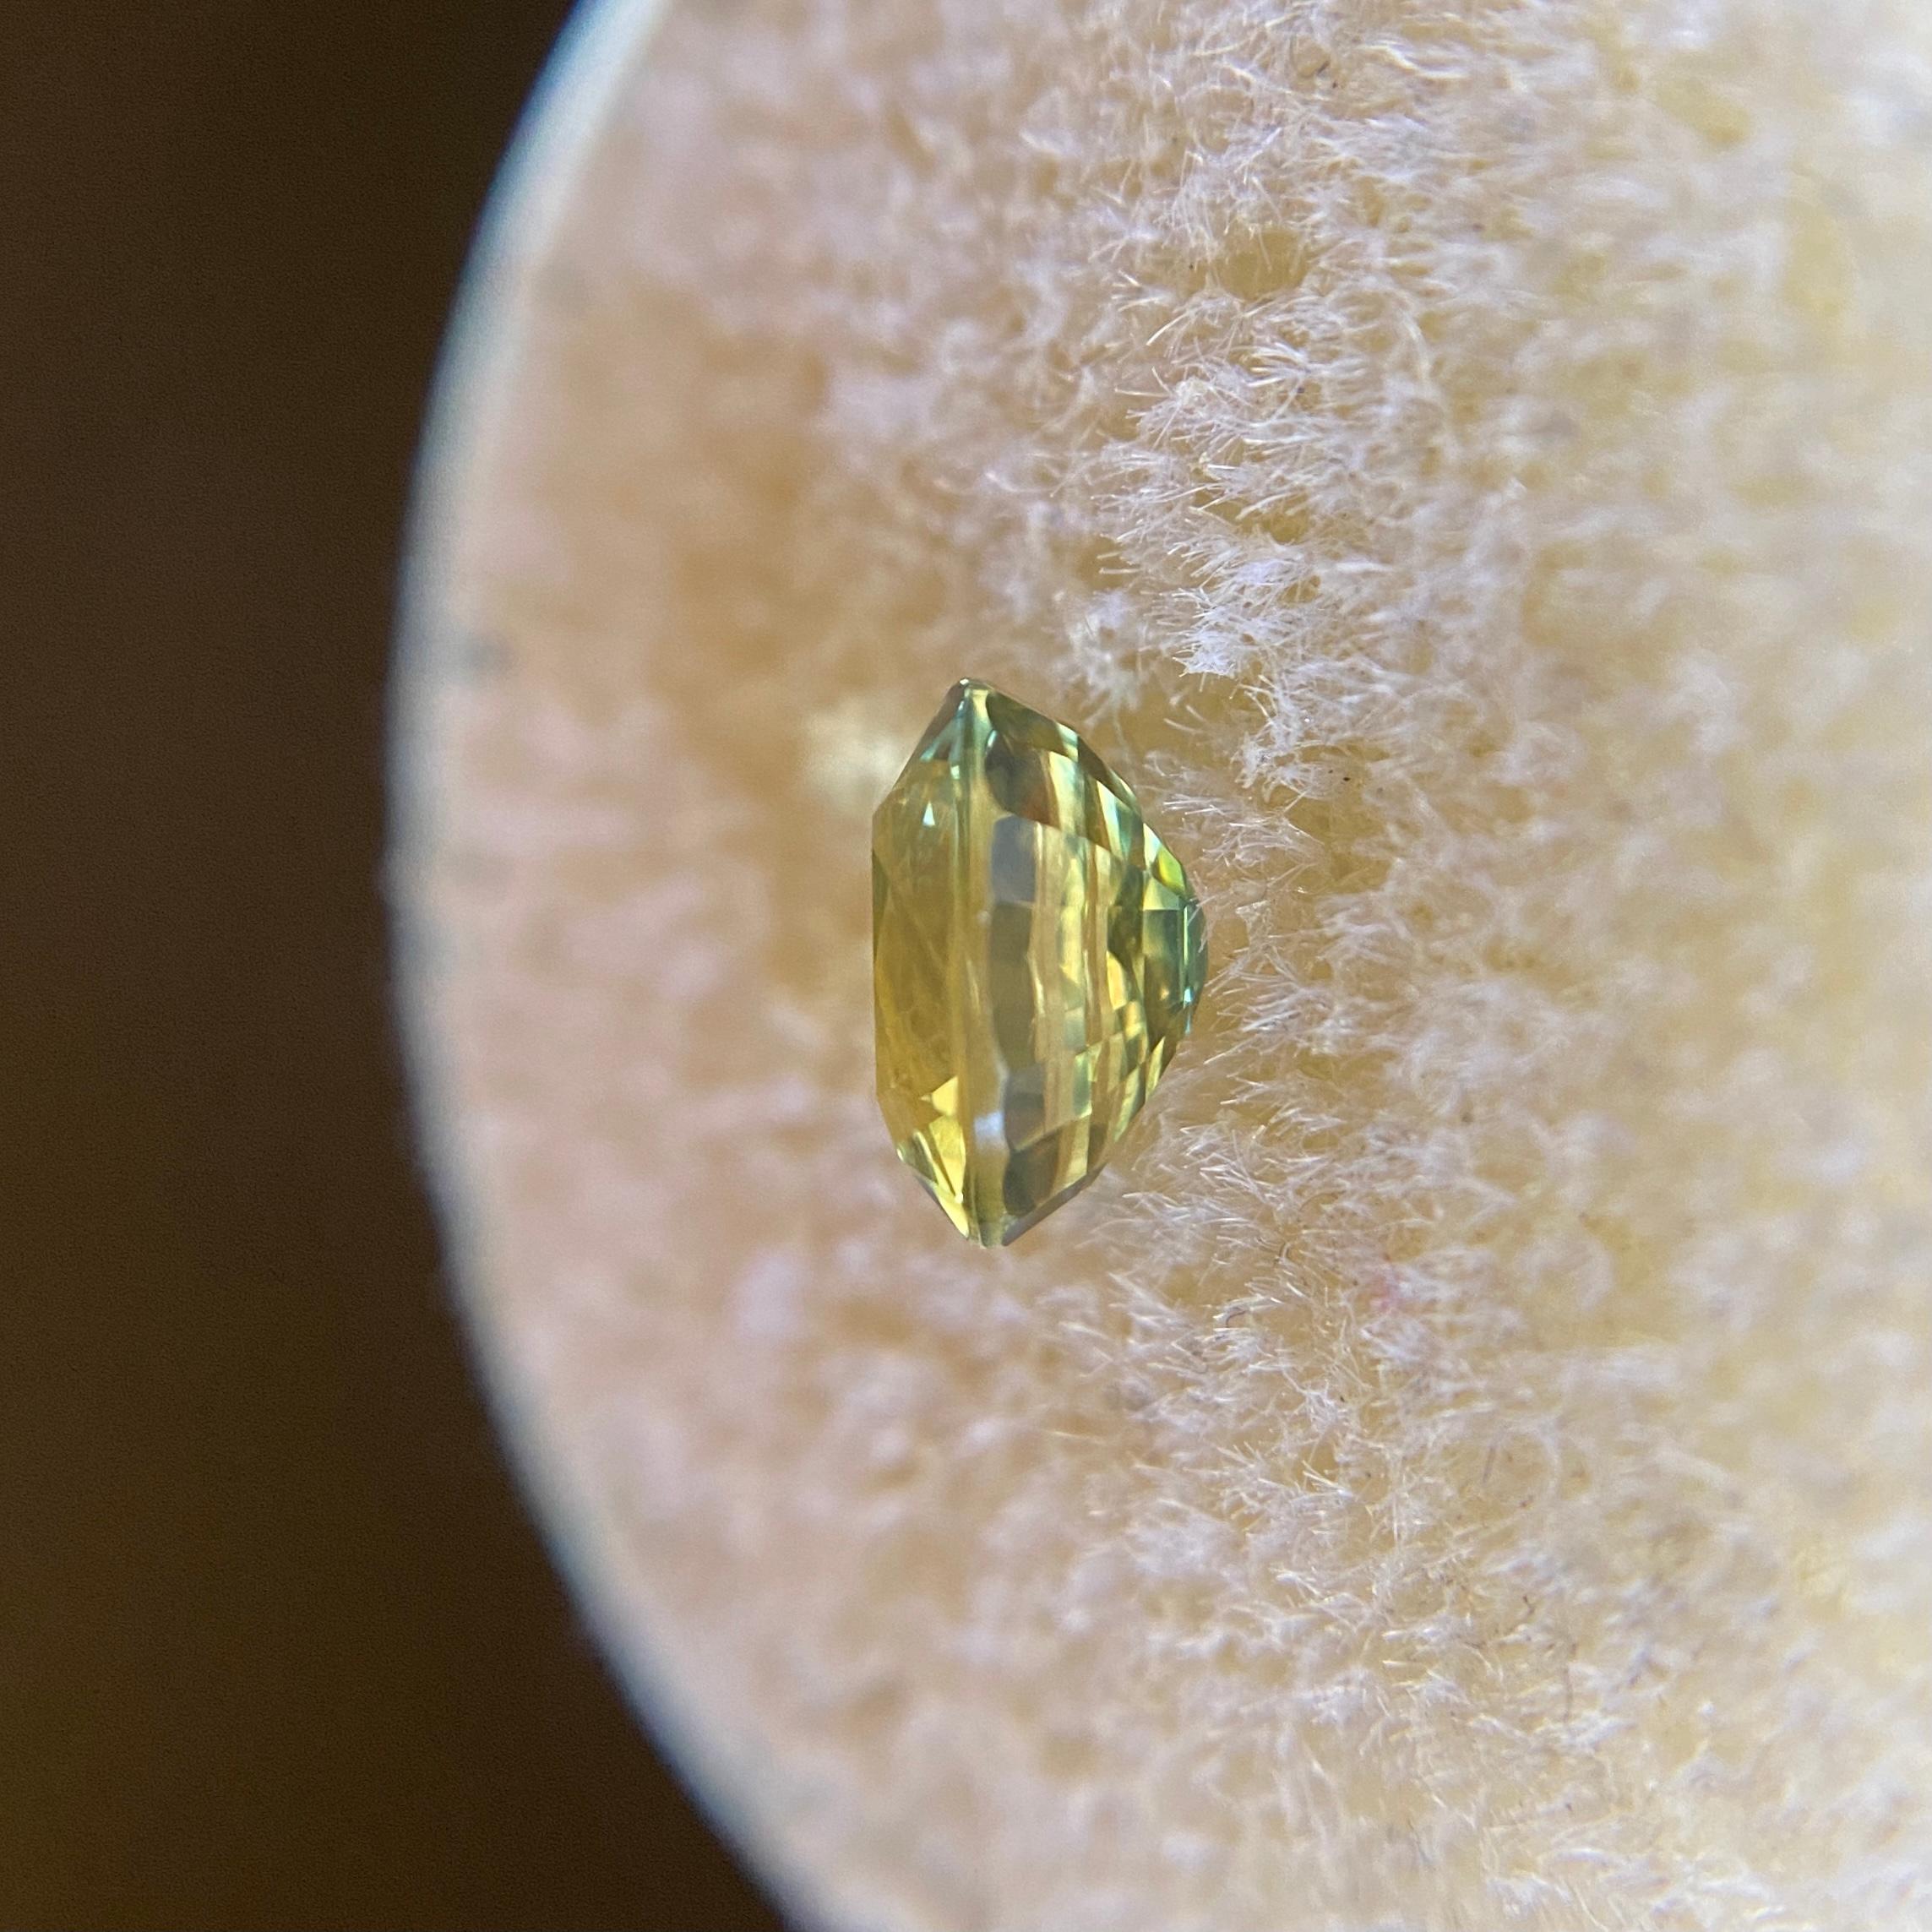 Rare Green Blue Yellow Australian Parti Colour Sapphire Gemstone.

1.06 Carat with a beautiful and unique green blue yellow parti colour effect. Also has excellent clarity, a very clean stone with only some small natural inclusions visible when